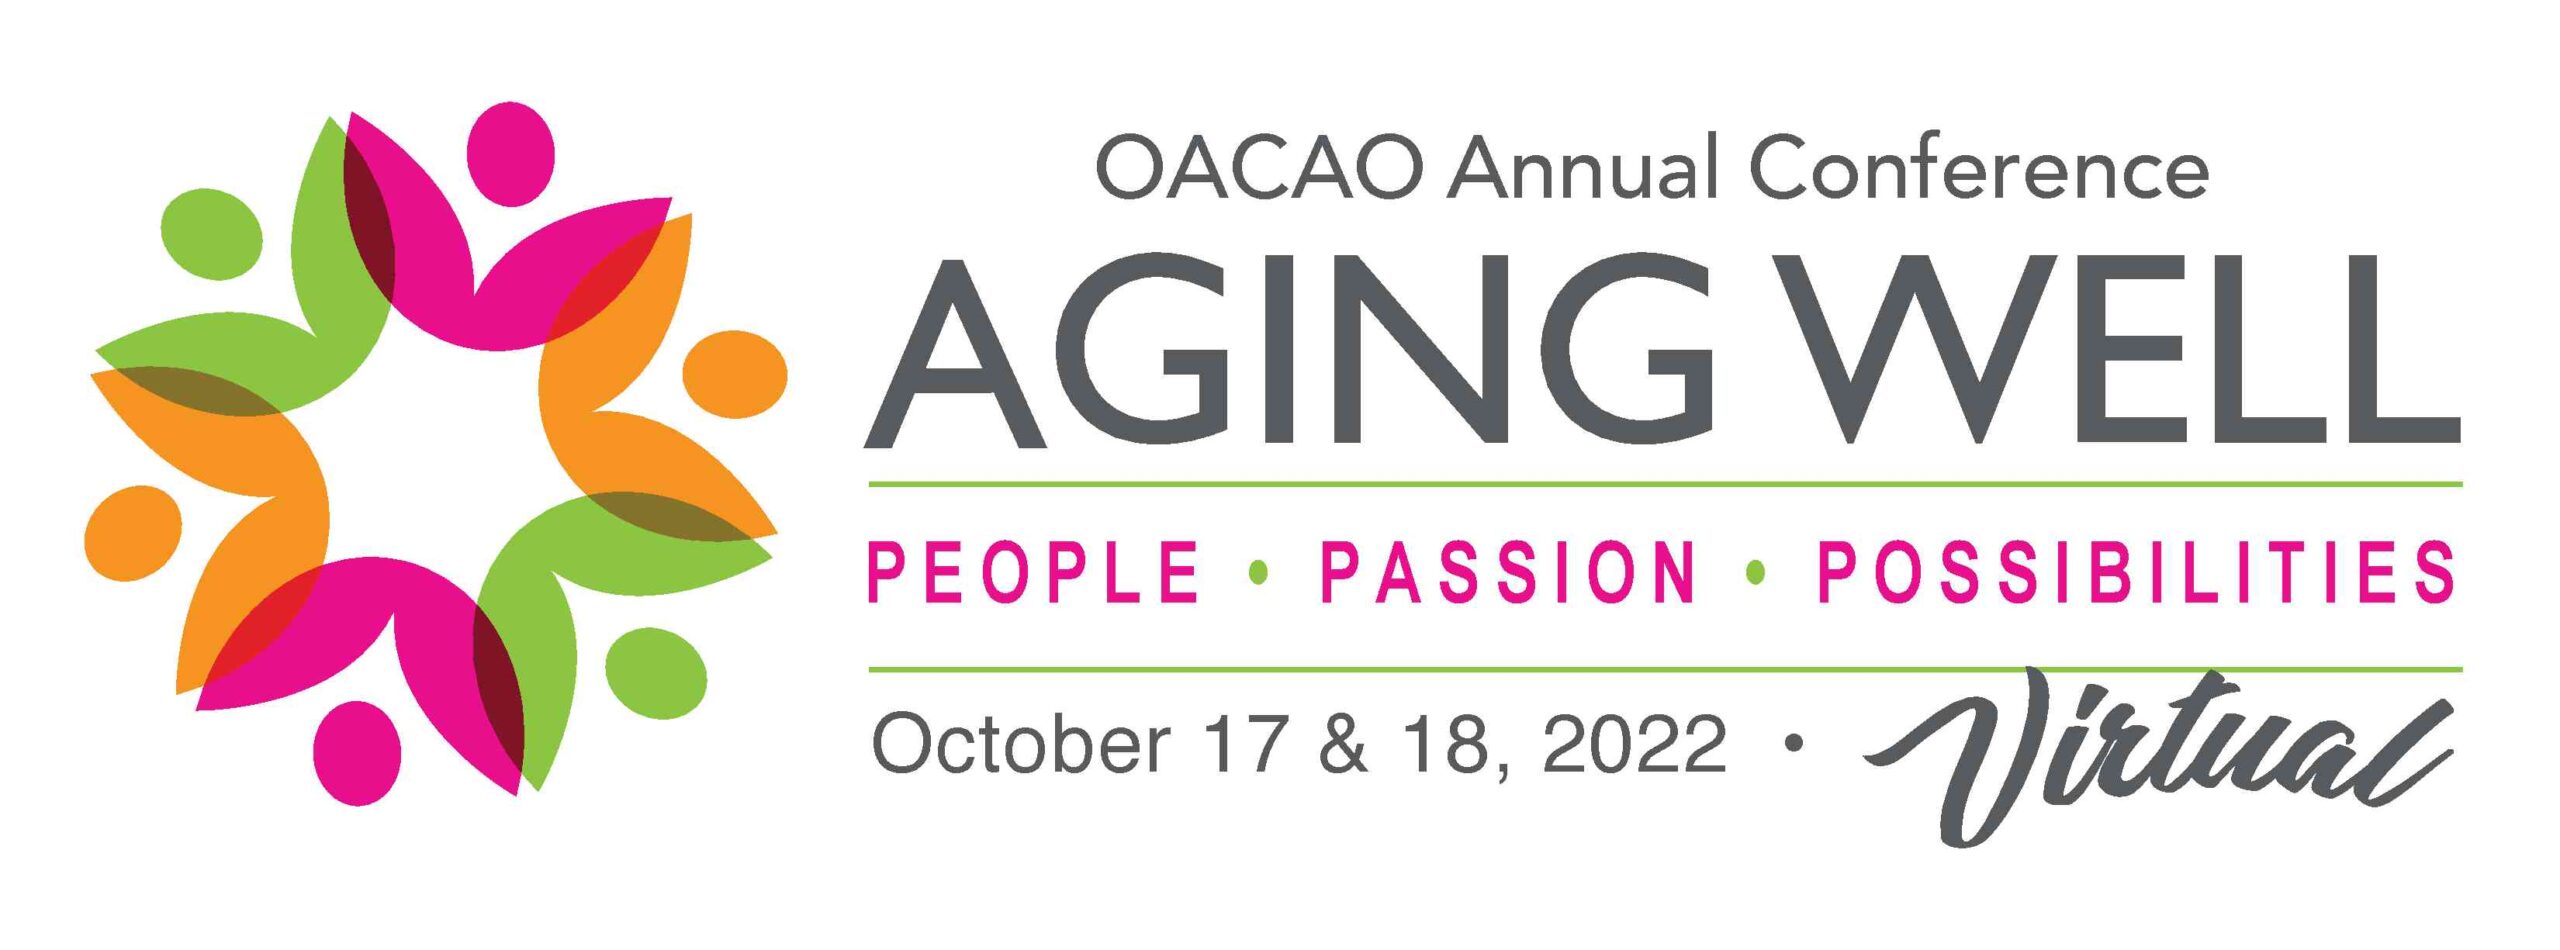 Aging Well Virtual Conference OACAO